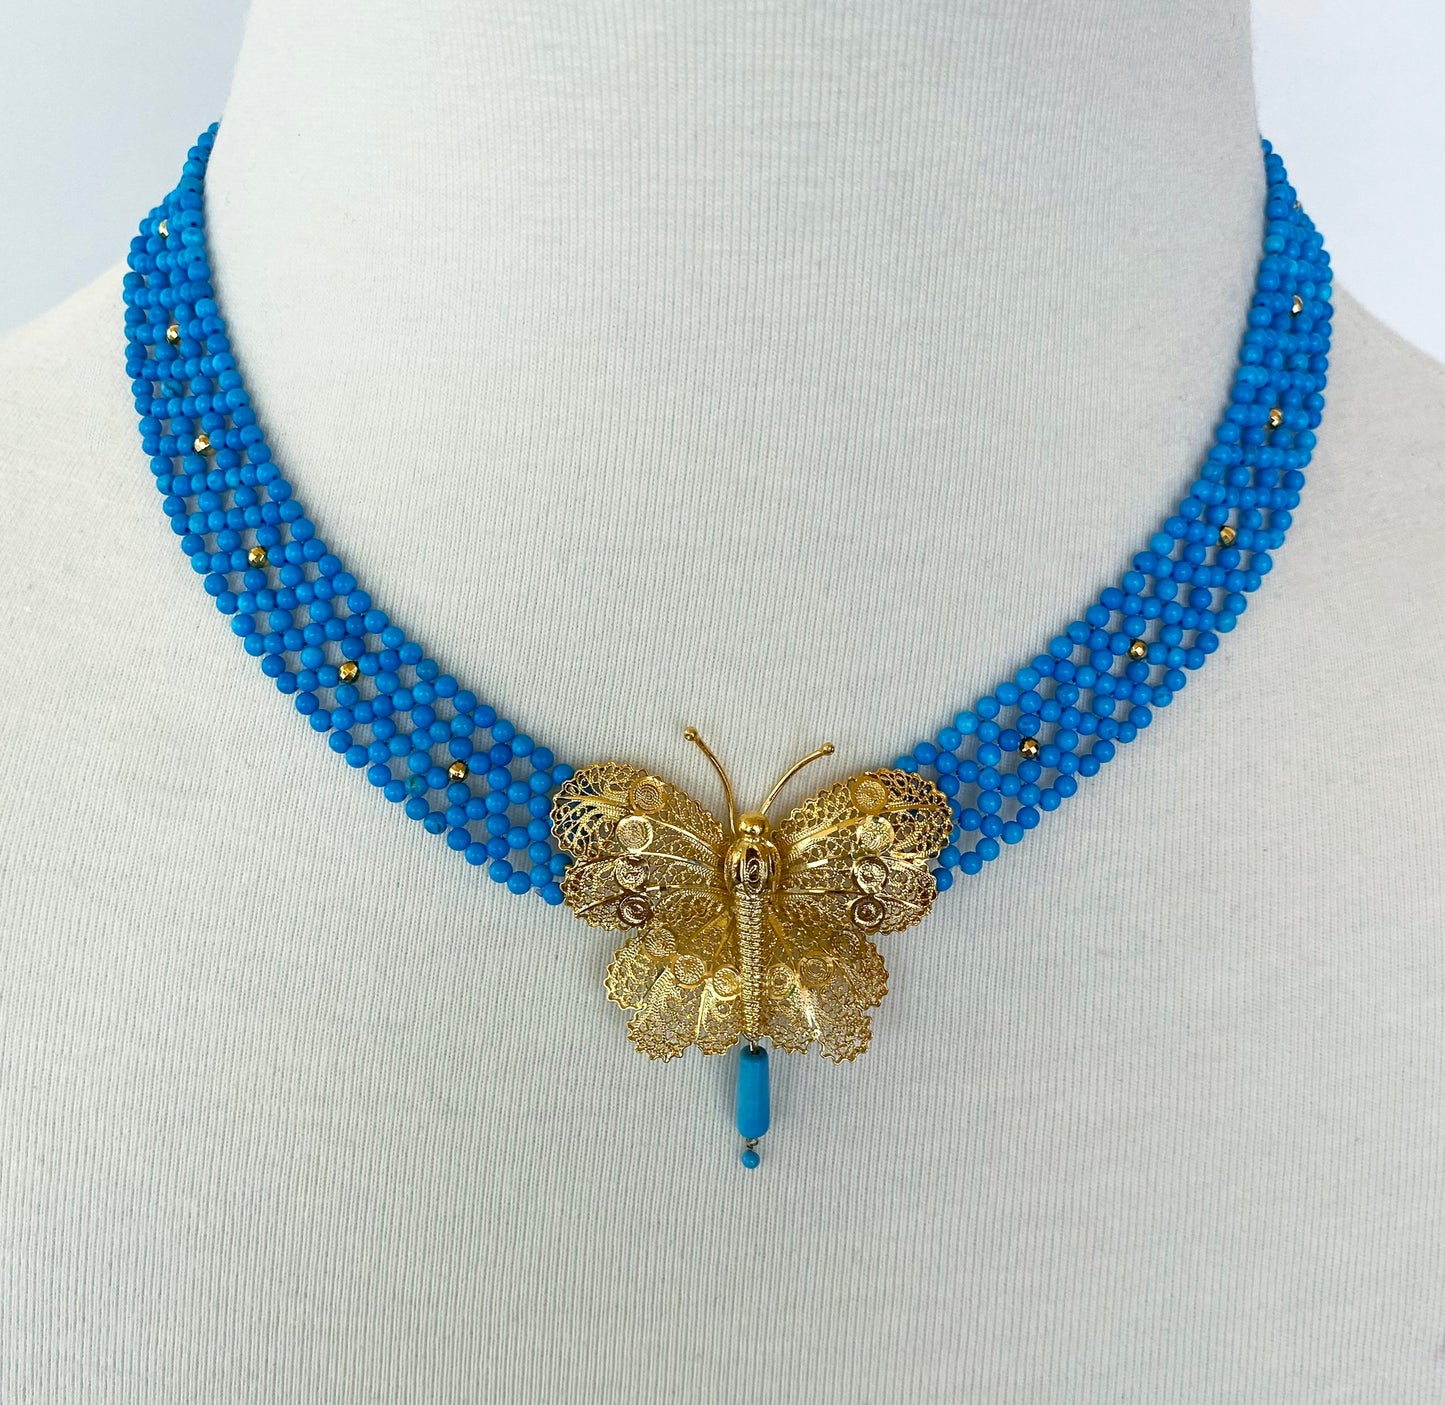 Turquoise Woven Necklace with Yellow Gold Butterfly Centerpiece